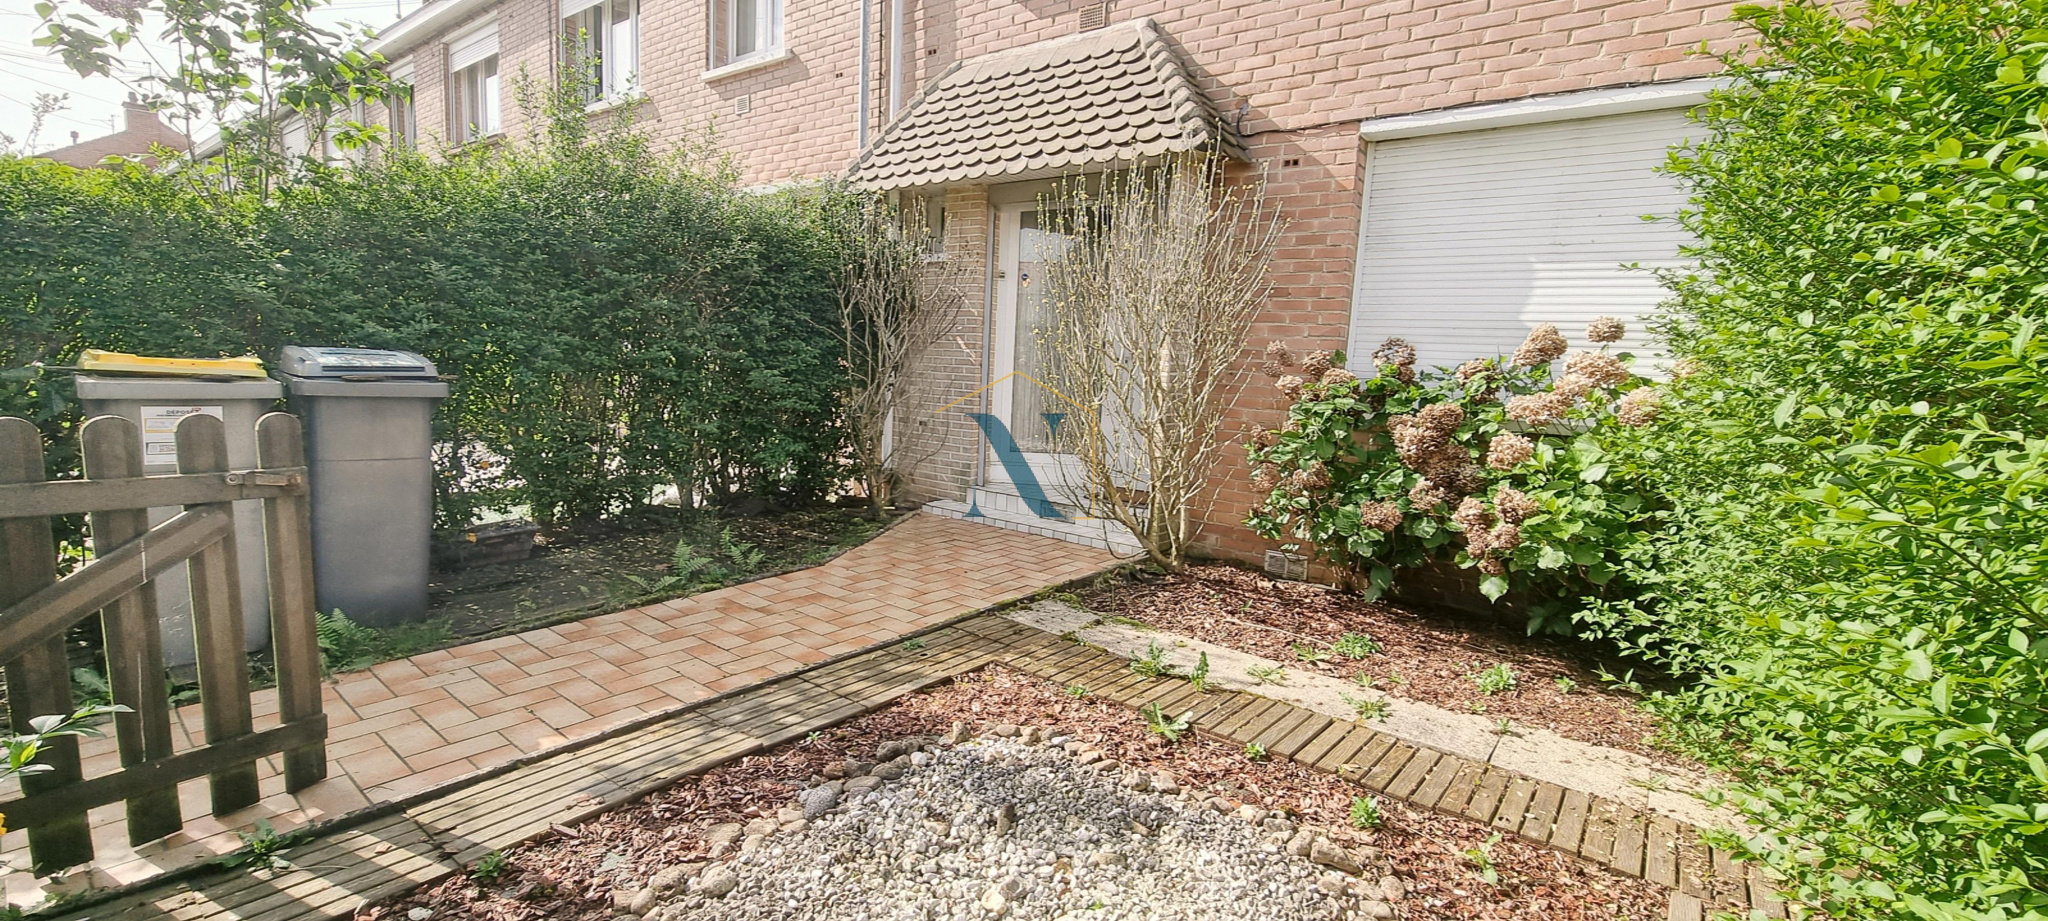 Maison 4 pièces 82 m² Faches-Thumesnil